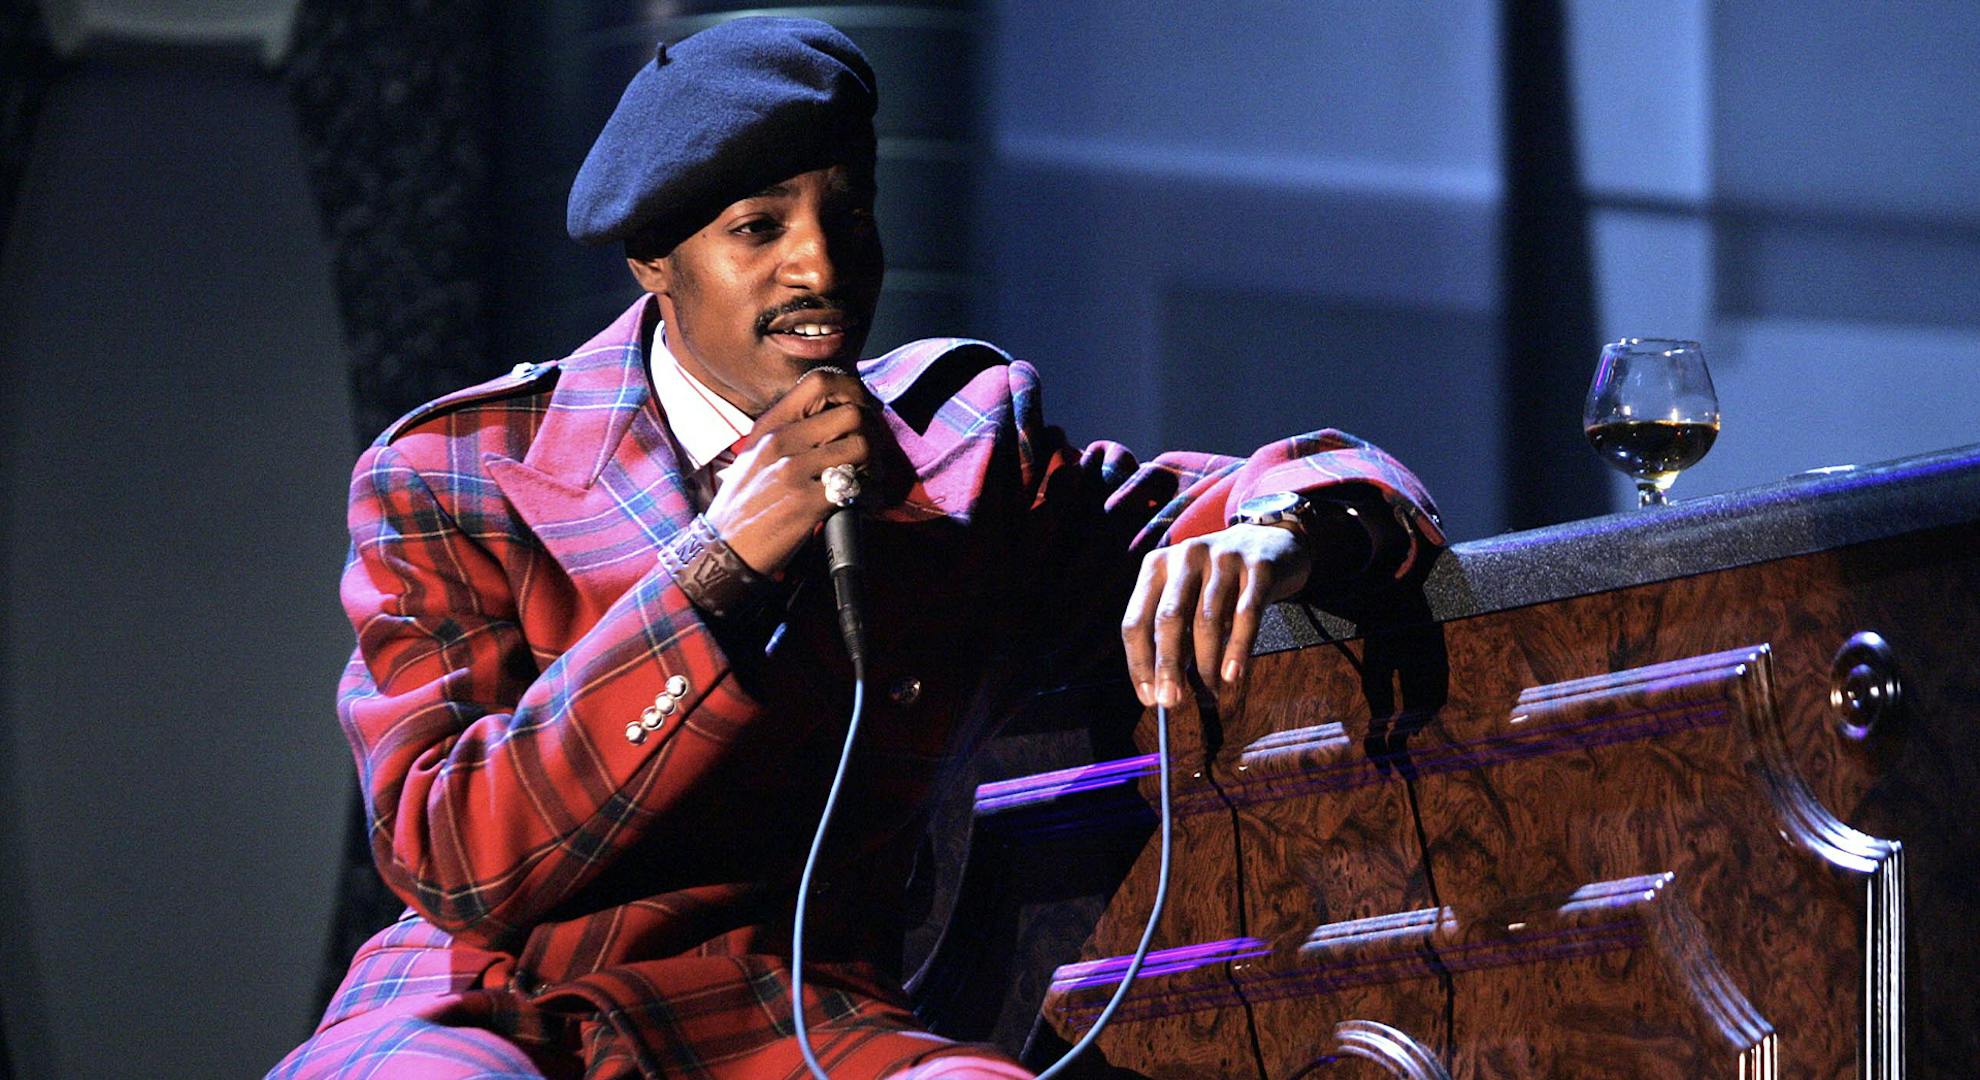 Andre 3000 of OutKast performs on stage at the "Fashion Rocks" concert held at Radio City Music Hall on September 8, 2004 in New York City.